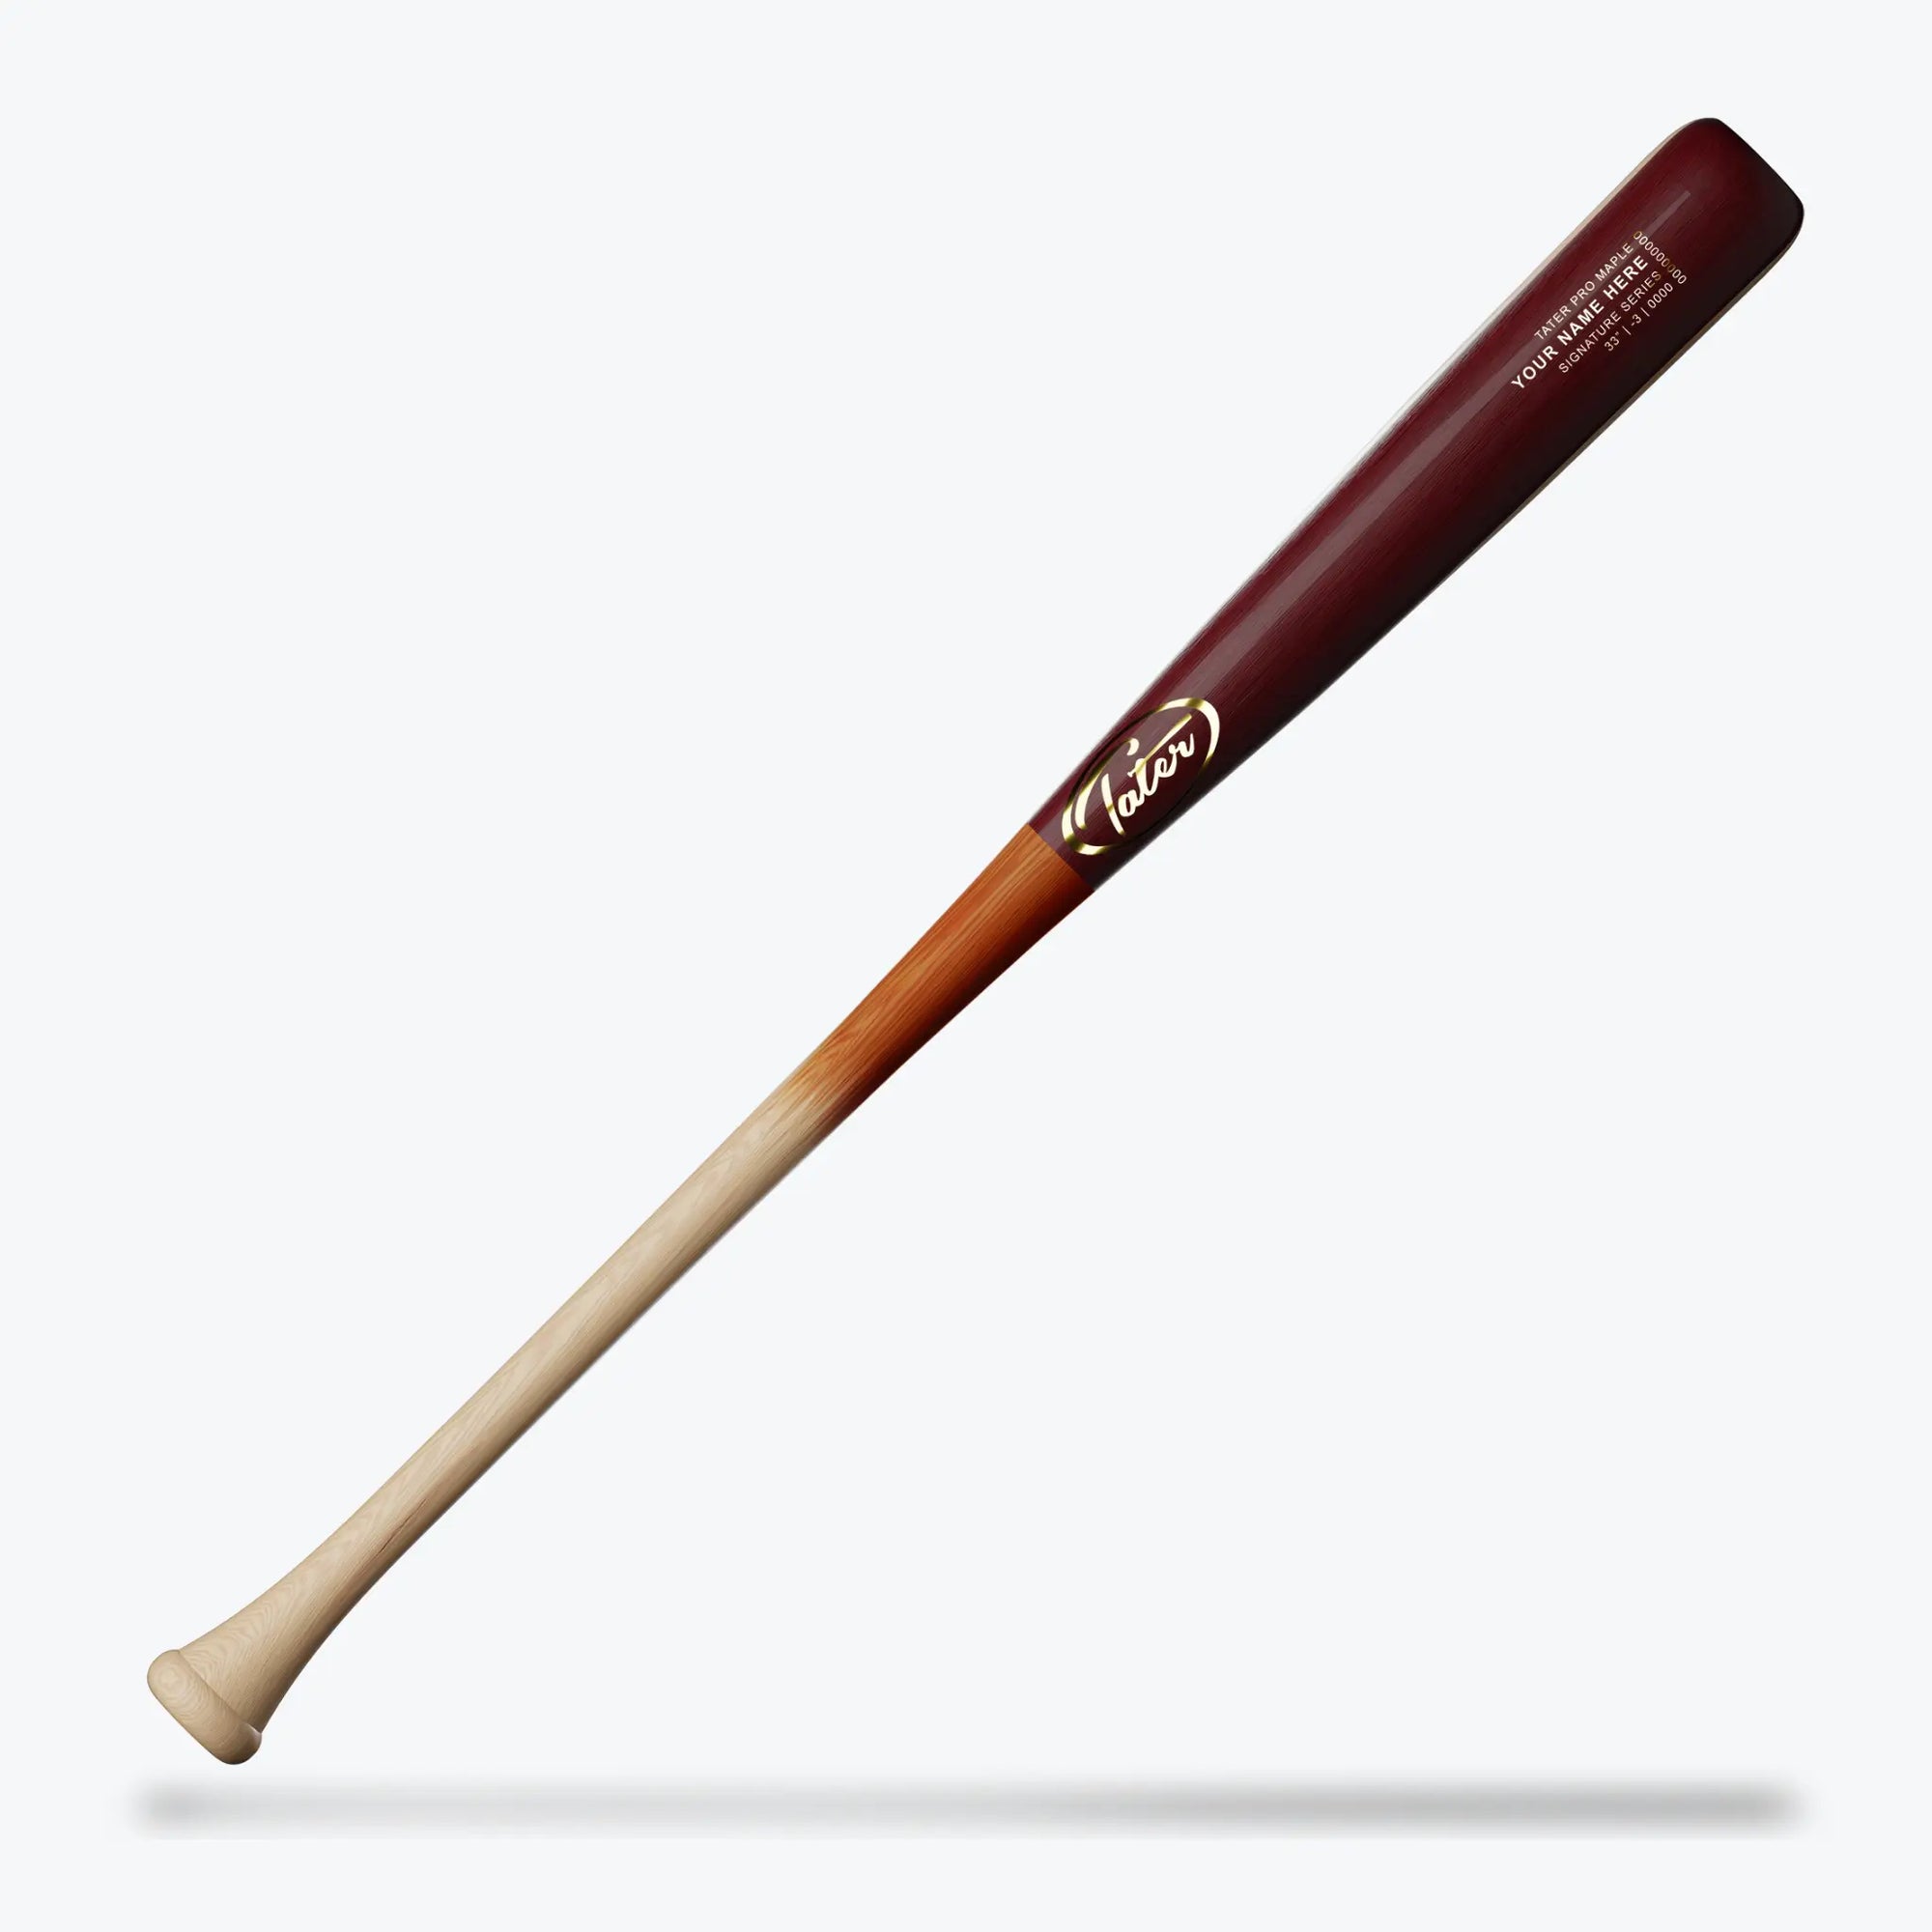 This image presents the Tater Baseball X12 custom wood bat, which boasts a balanced weight distribution. The barrel is a deep maroon, gracefully blending into the natural wooden hue of the handle. It's available in 31 to 33 inches with a minus drop-3 weight, perfect for hitters looking for a bat that offers control and a smooth swing.